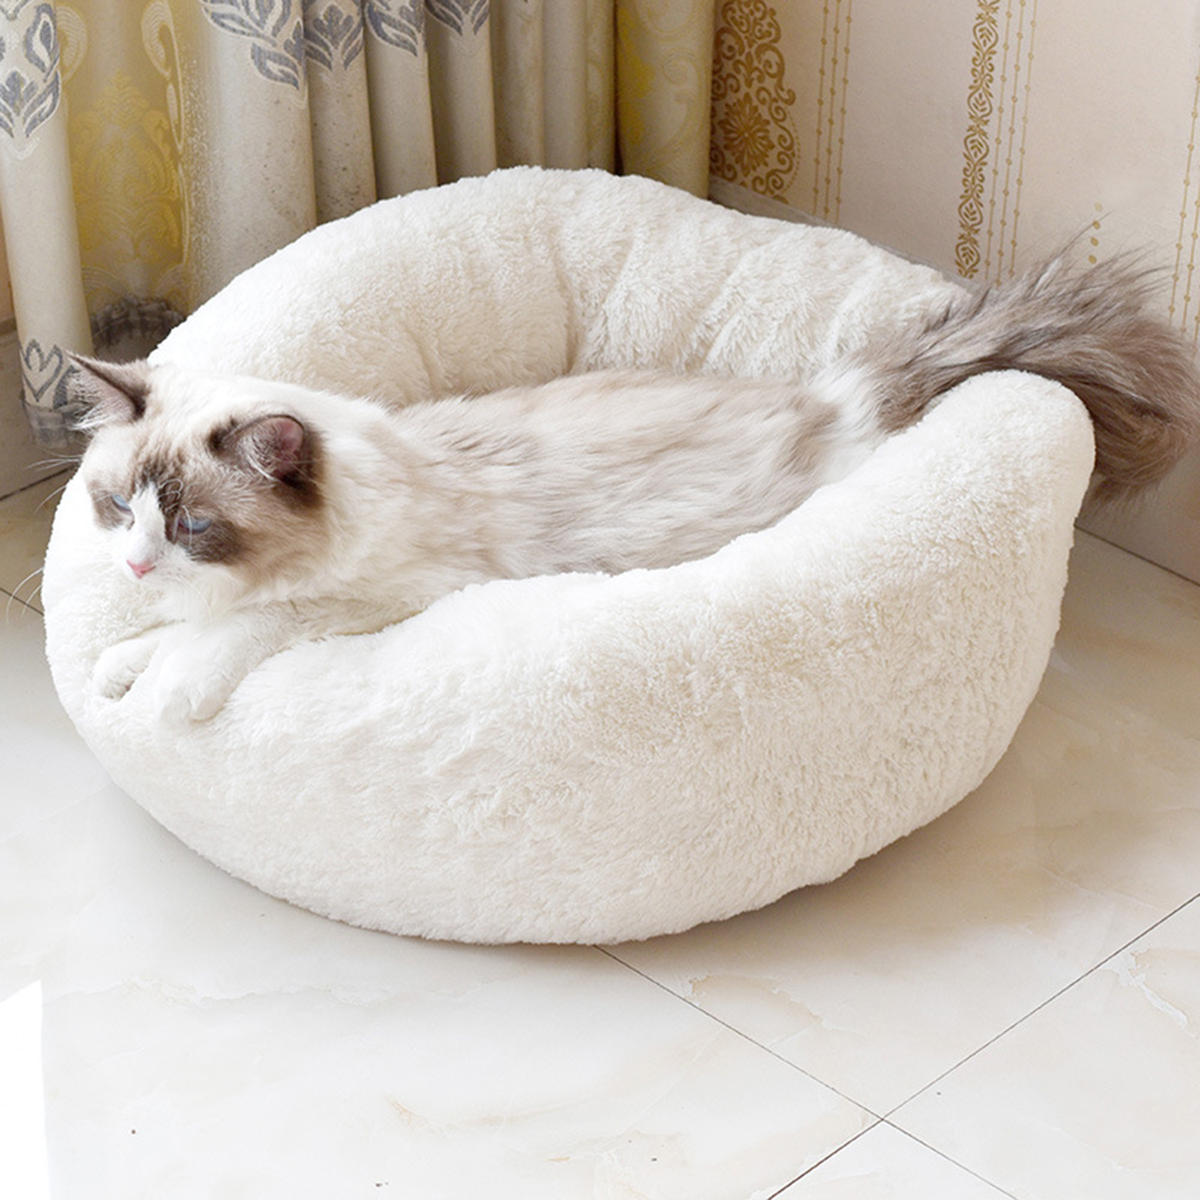 Image of S/M/L Donut Plush Small Dog Cat Beds Warm Soft Pet House Nest With Pillow Cave Pet Bed